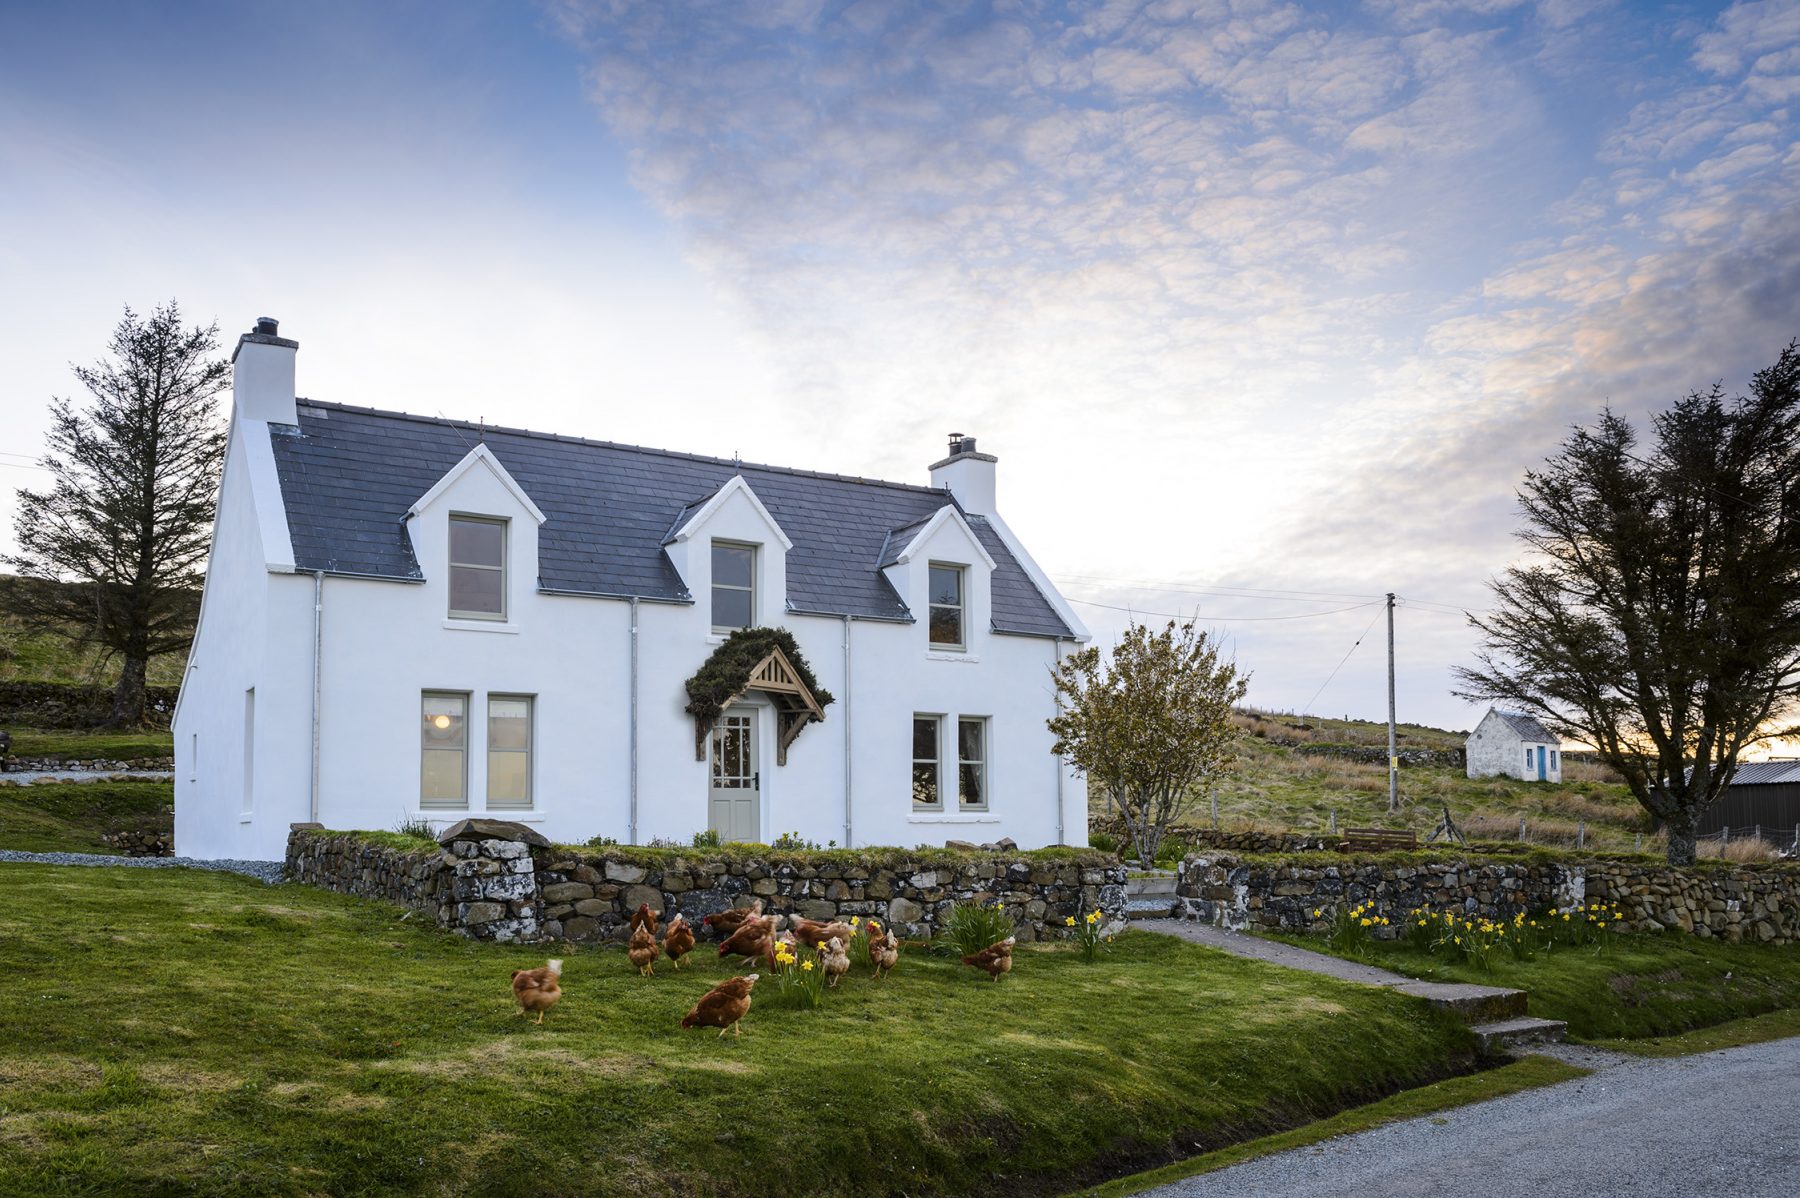 Croft House Cottage - A traditional Hebridean croft house built in 1934 by local craftsman in village stone.